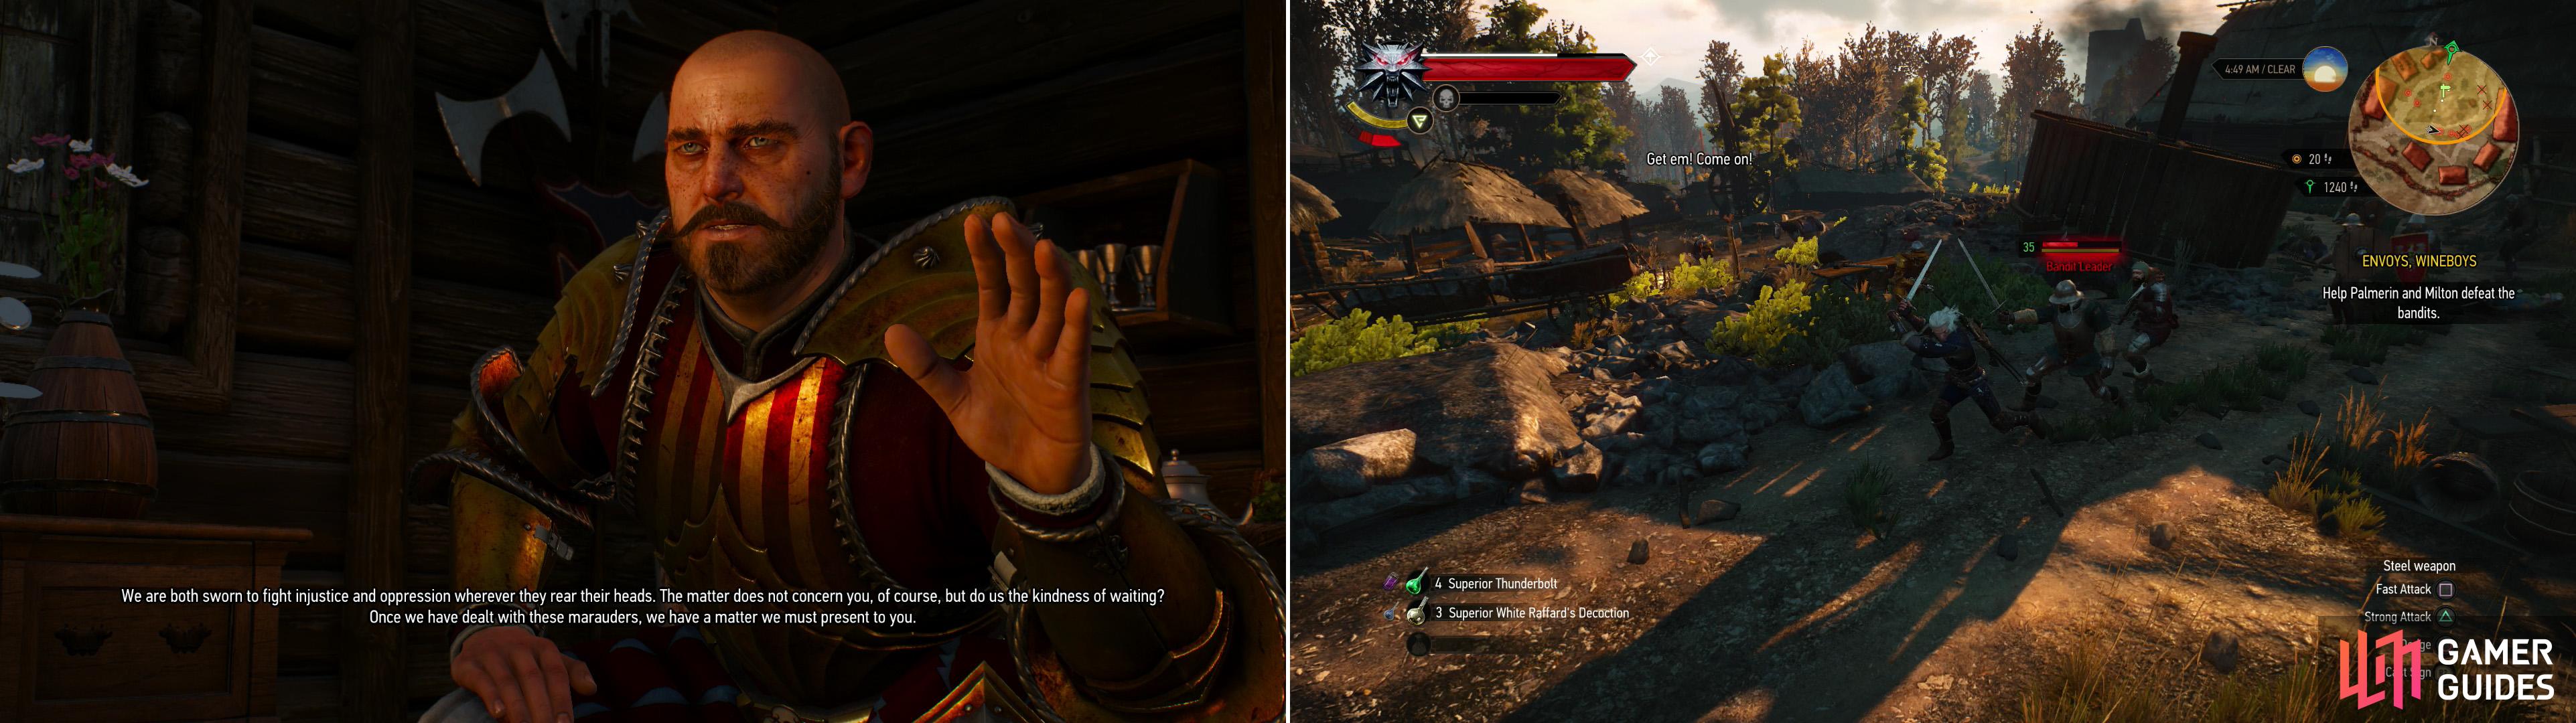 In the village of Stonecutters Settlement youll find two knights from Toussaint (left), who have a bit of business for you after they deal with some bandits (right).